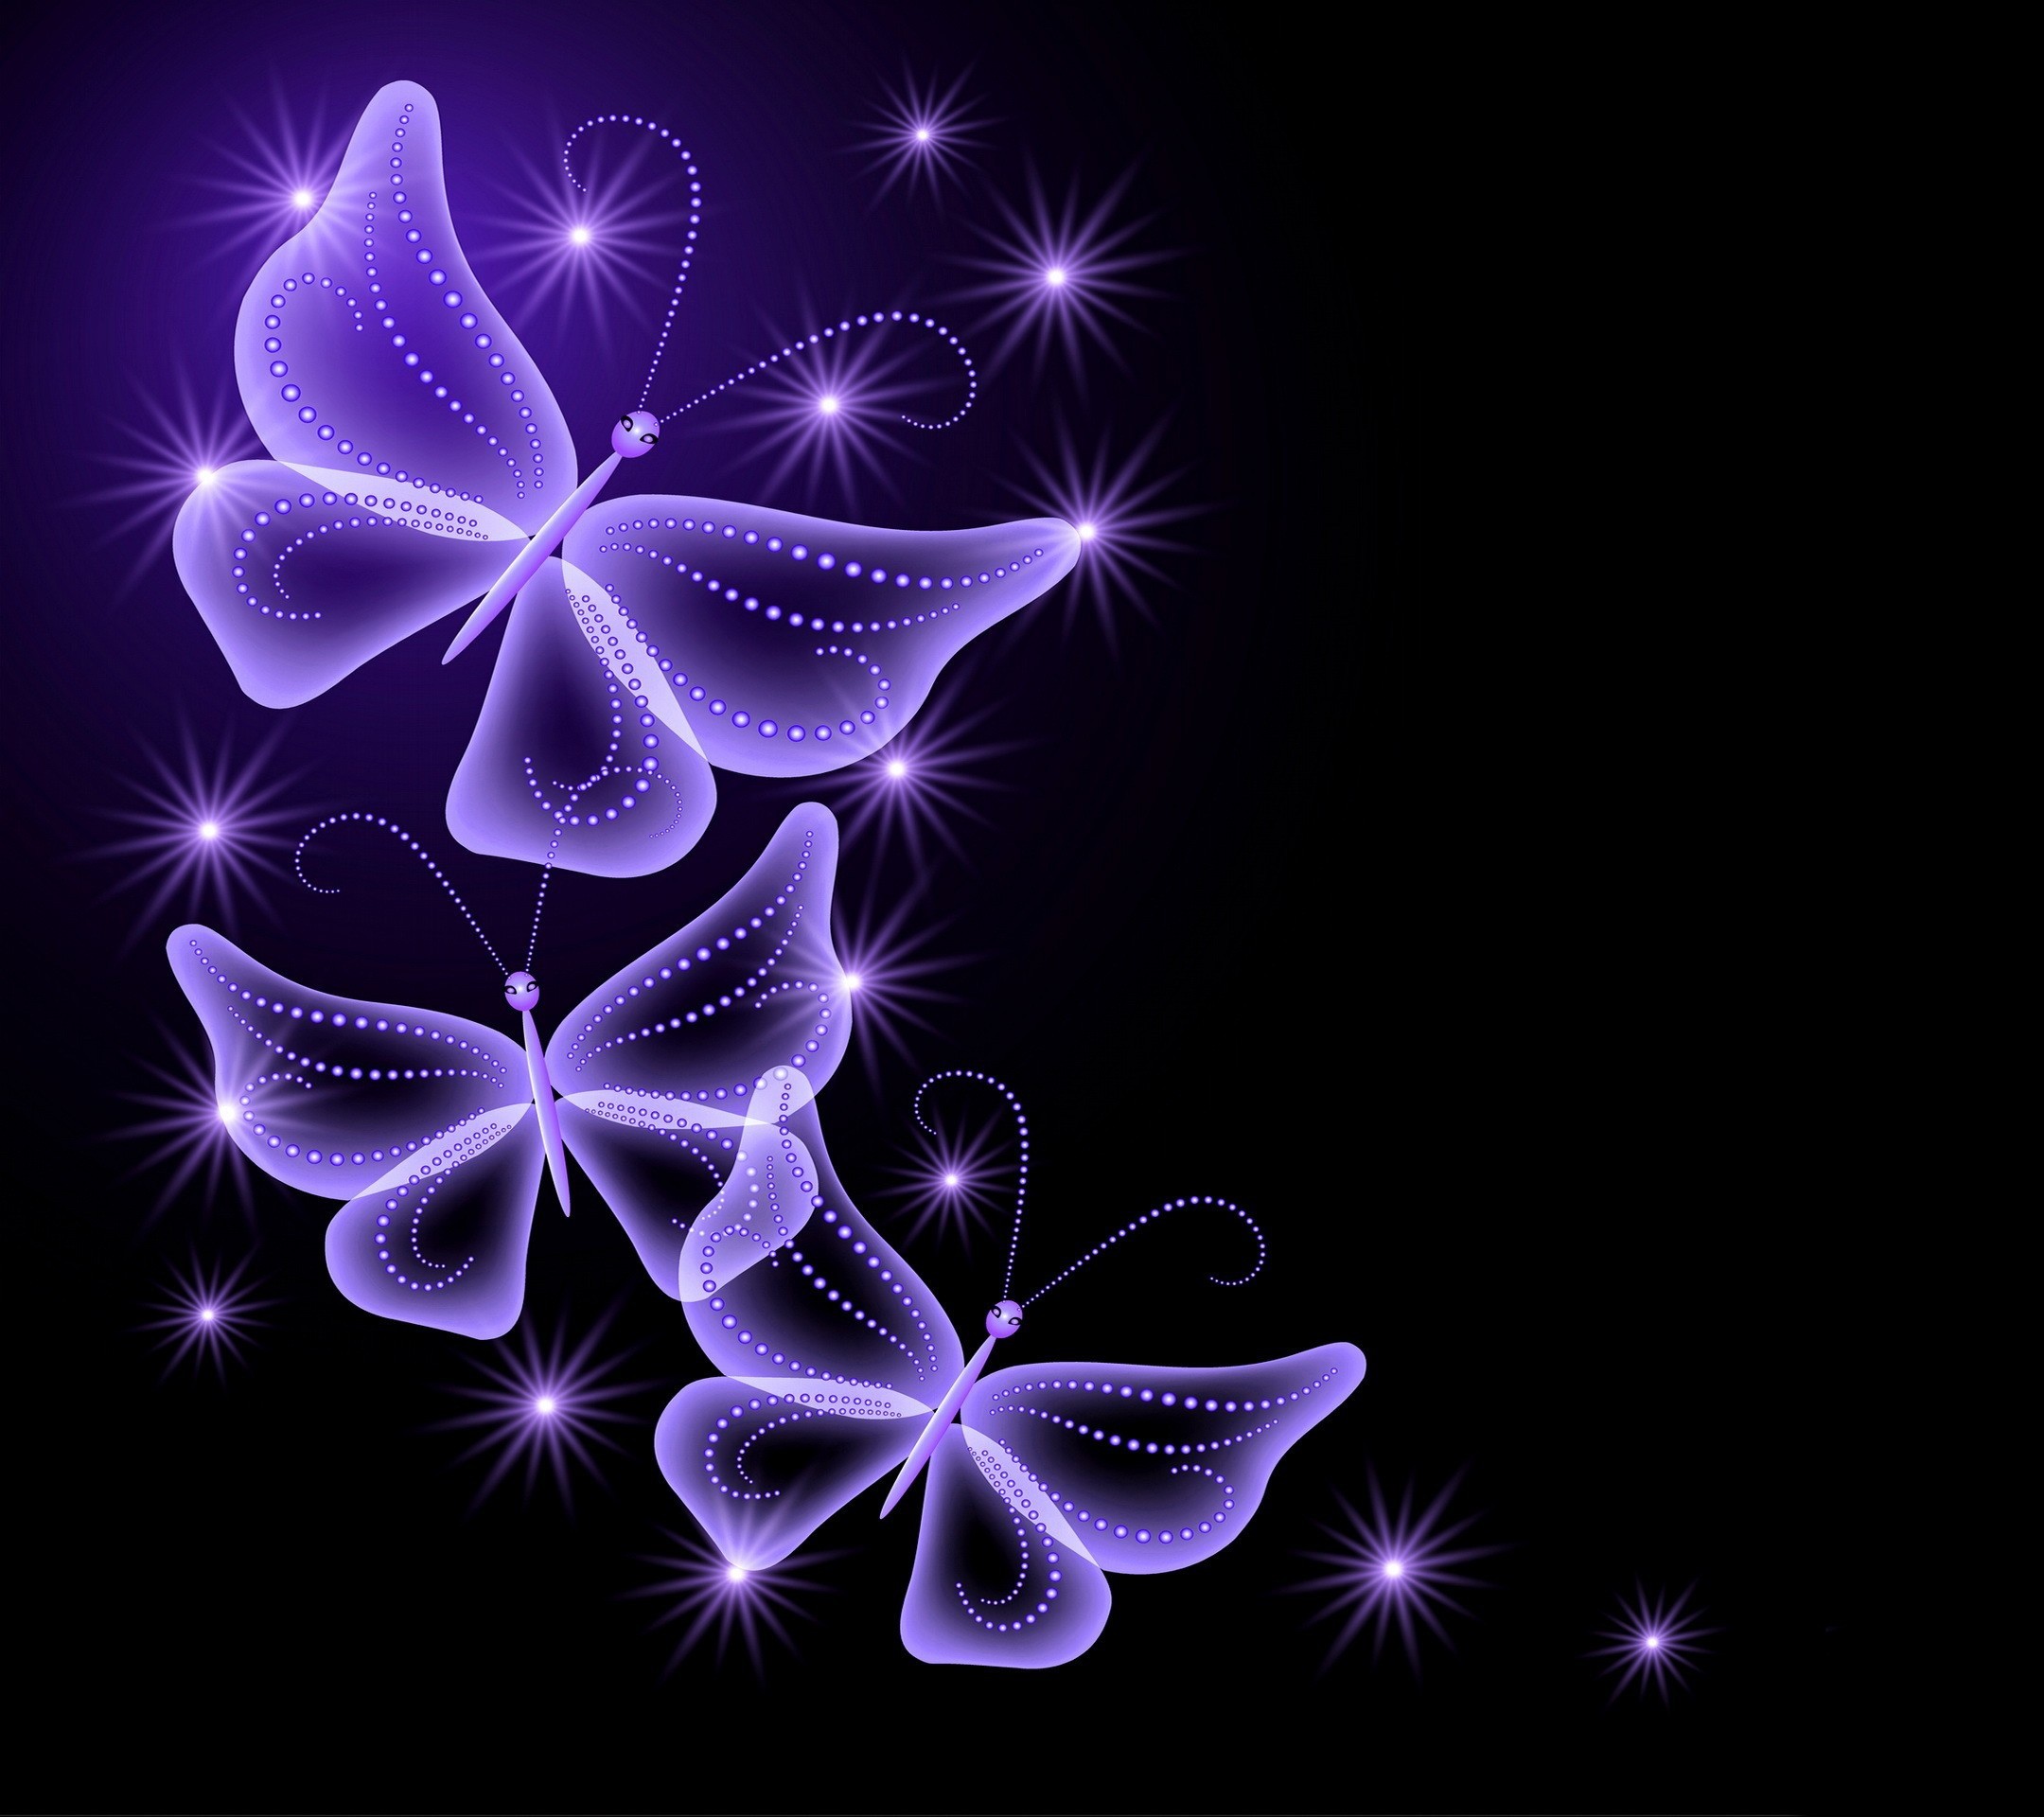 2160x1920 Purple Butterfly and Stars Wallpaper | Purple Backgrounds ... color aqua  personality | Background Wallpaper Image: Aqua .